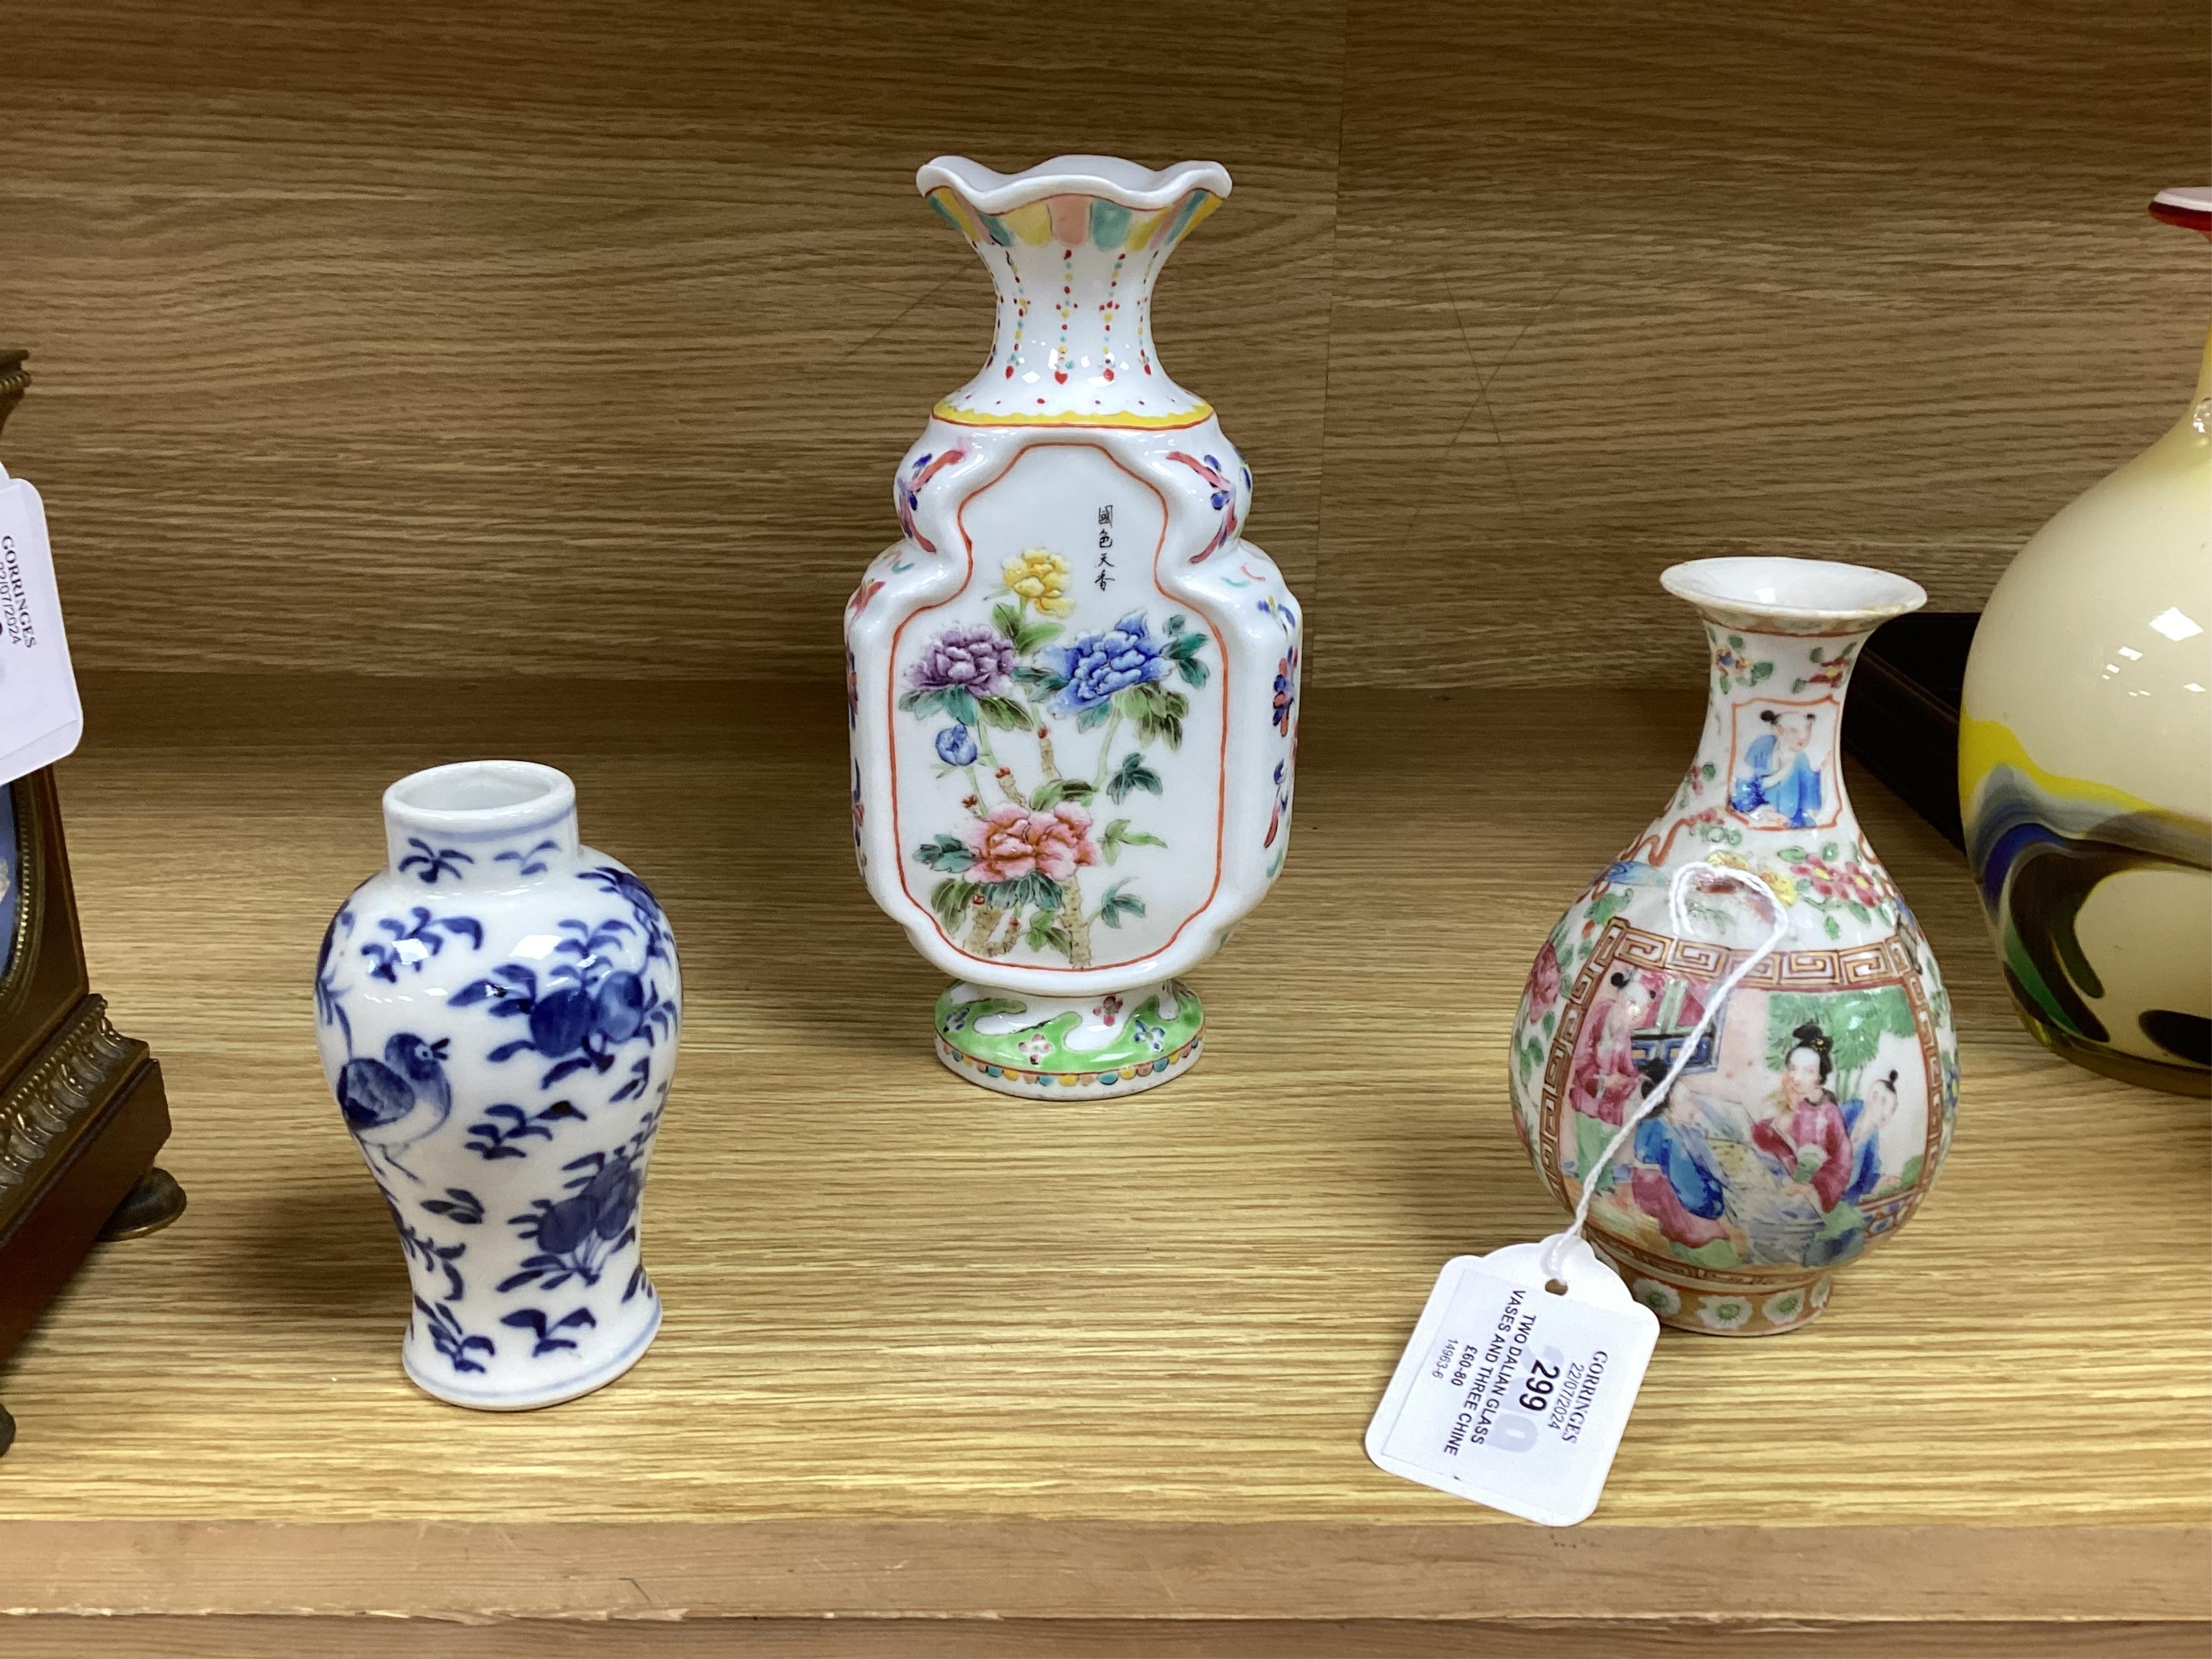 Two Dalian glass vases and three Chinese porcelain vases, 19th/20th century, tallest 19.5cm. Condition - fair